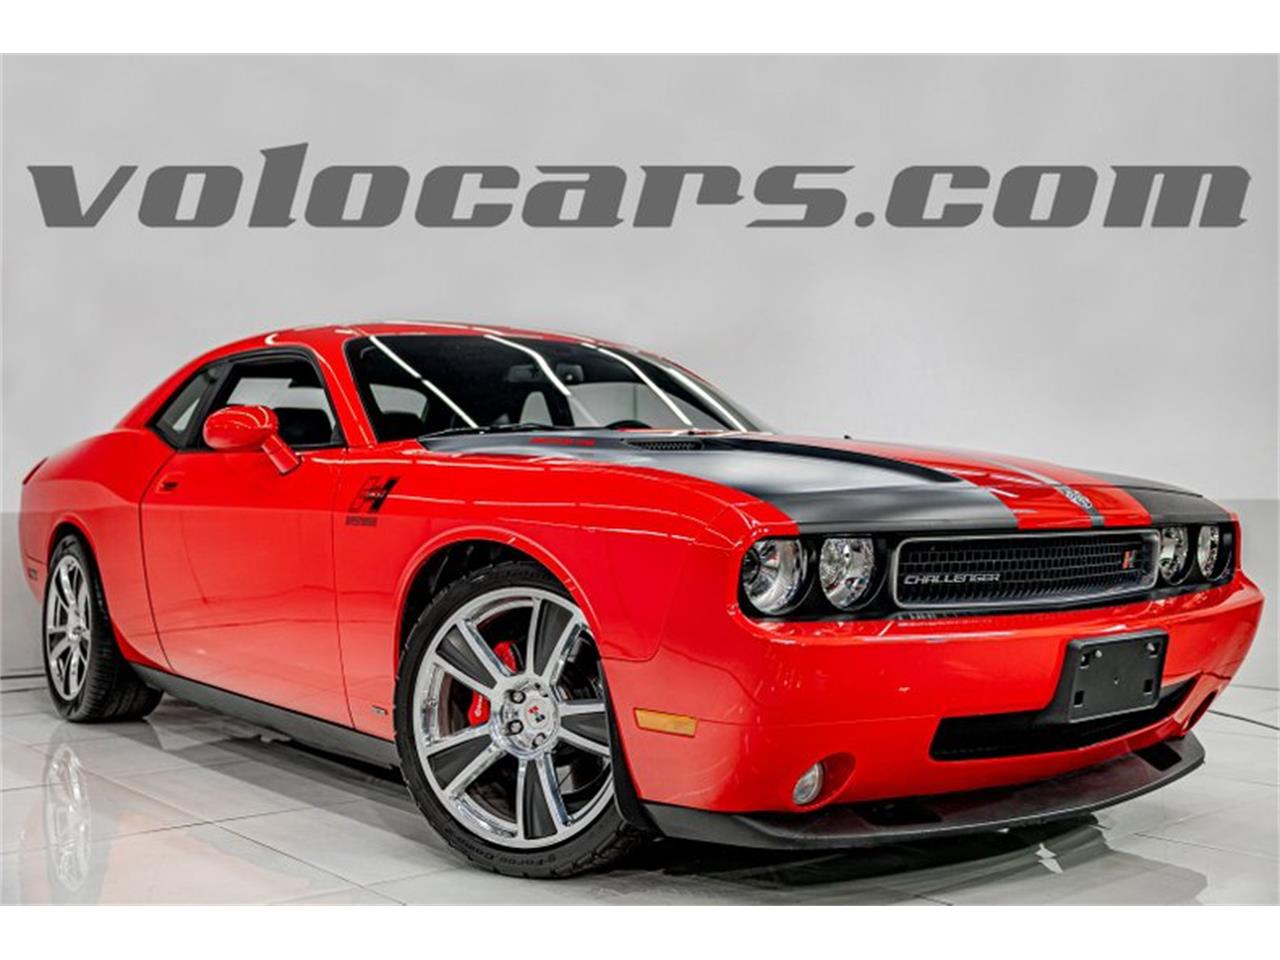 For Sale: 2010 Dodge Challenger in Volo, Illinois for sale in Ingleside, IL